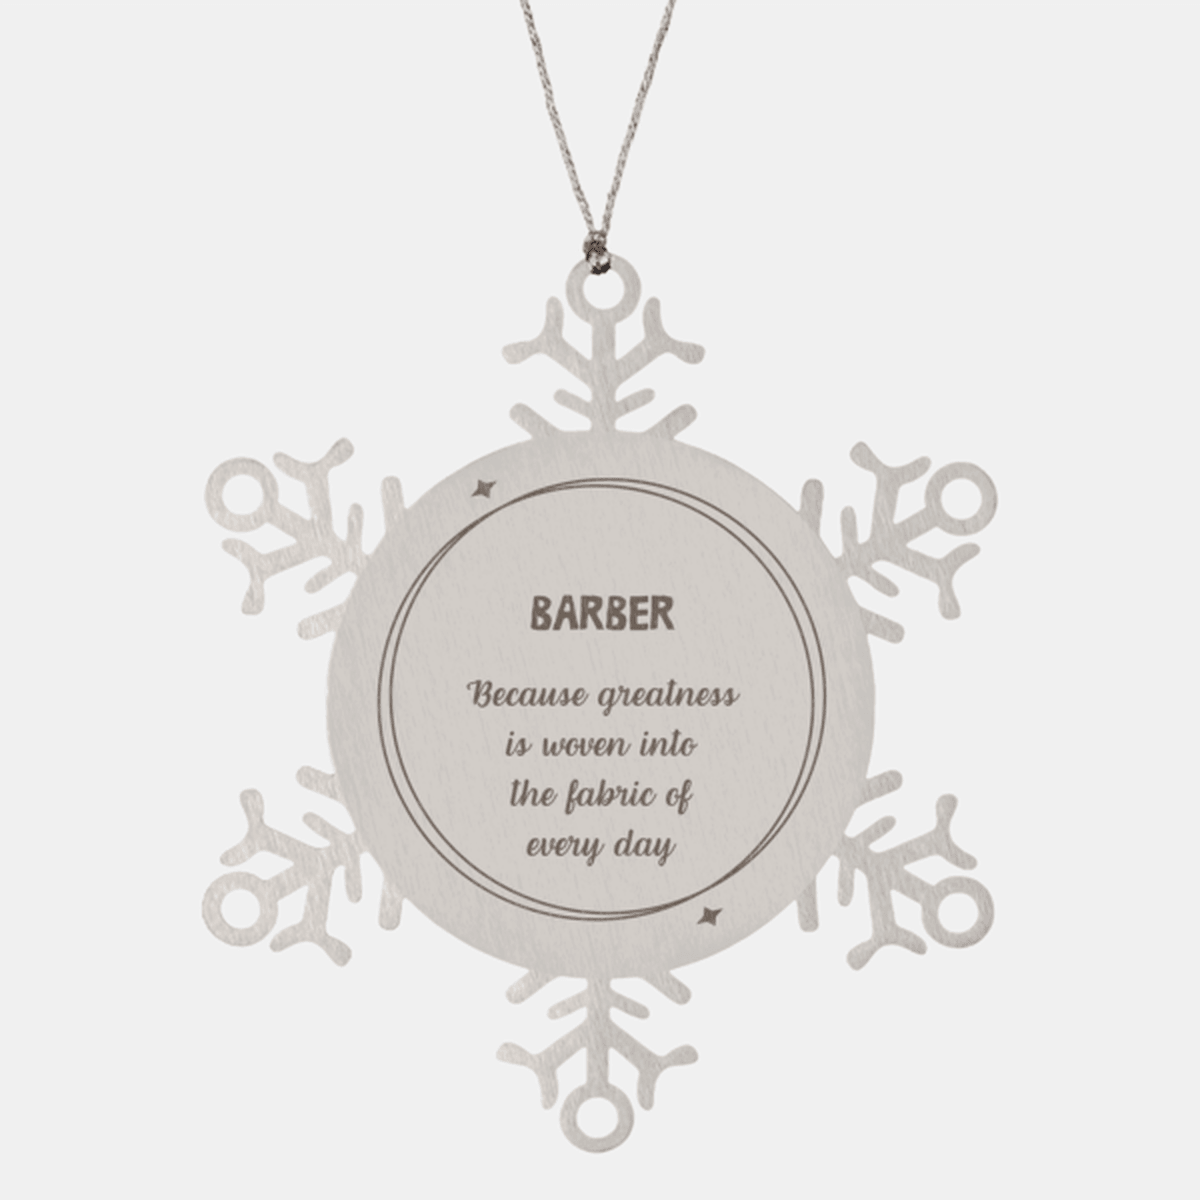 Sarcastic Barber Snowflake Ornament Gifts, Christmas Holiday Gifts for Barber Ornament, Barber: Because greatness is woven into the fabric of every day, Coworkers, Friends - Mallard Moon Gift Shop